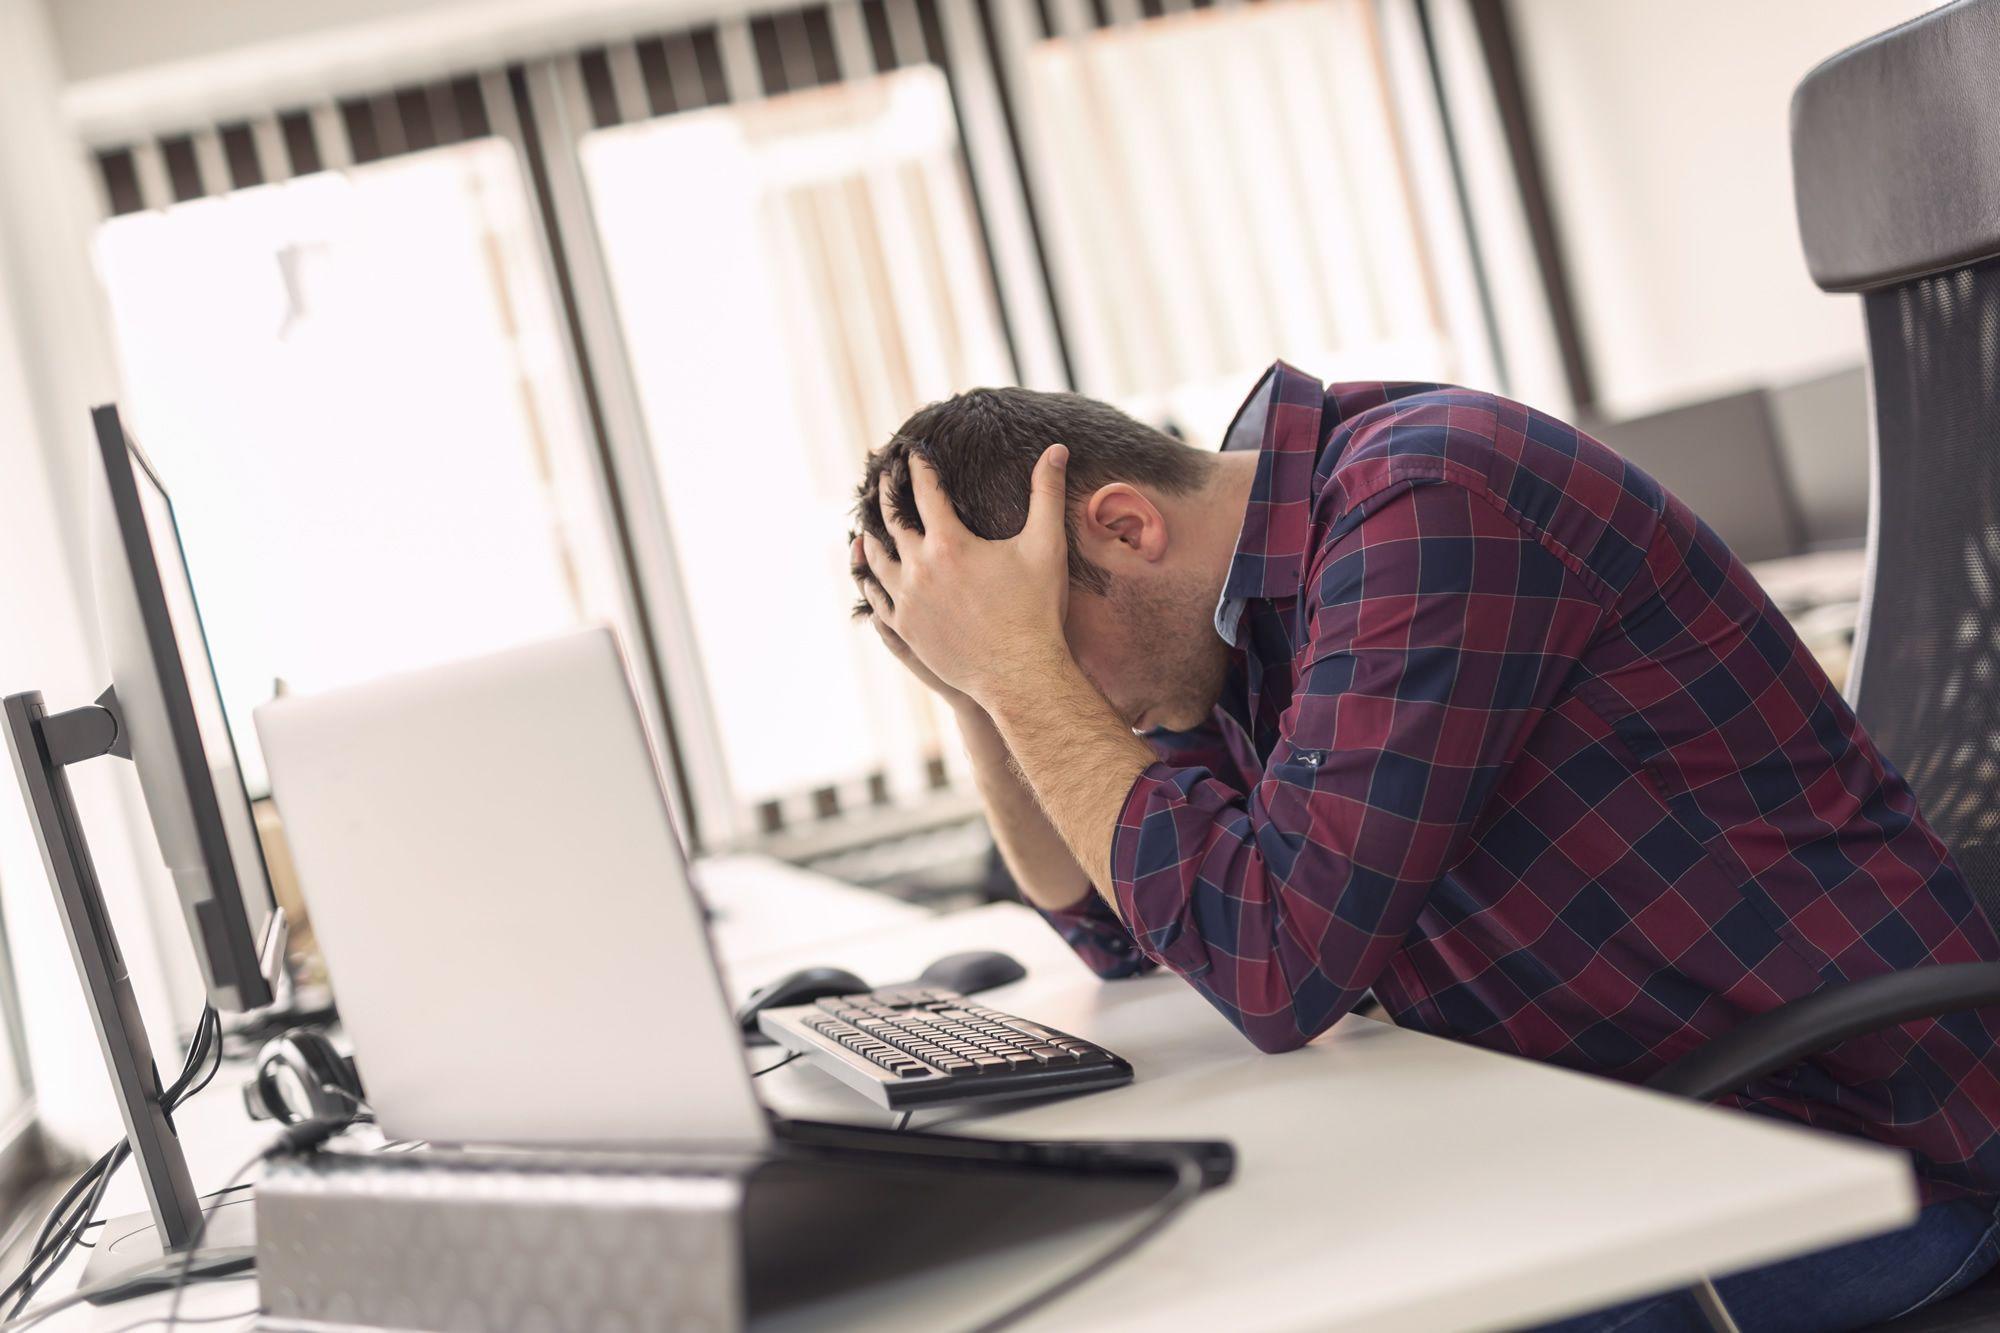 Spotting chronic stress and poor mental health in your staff